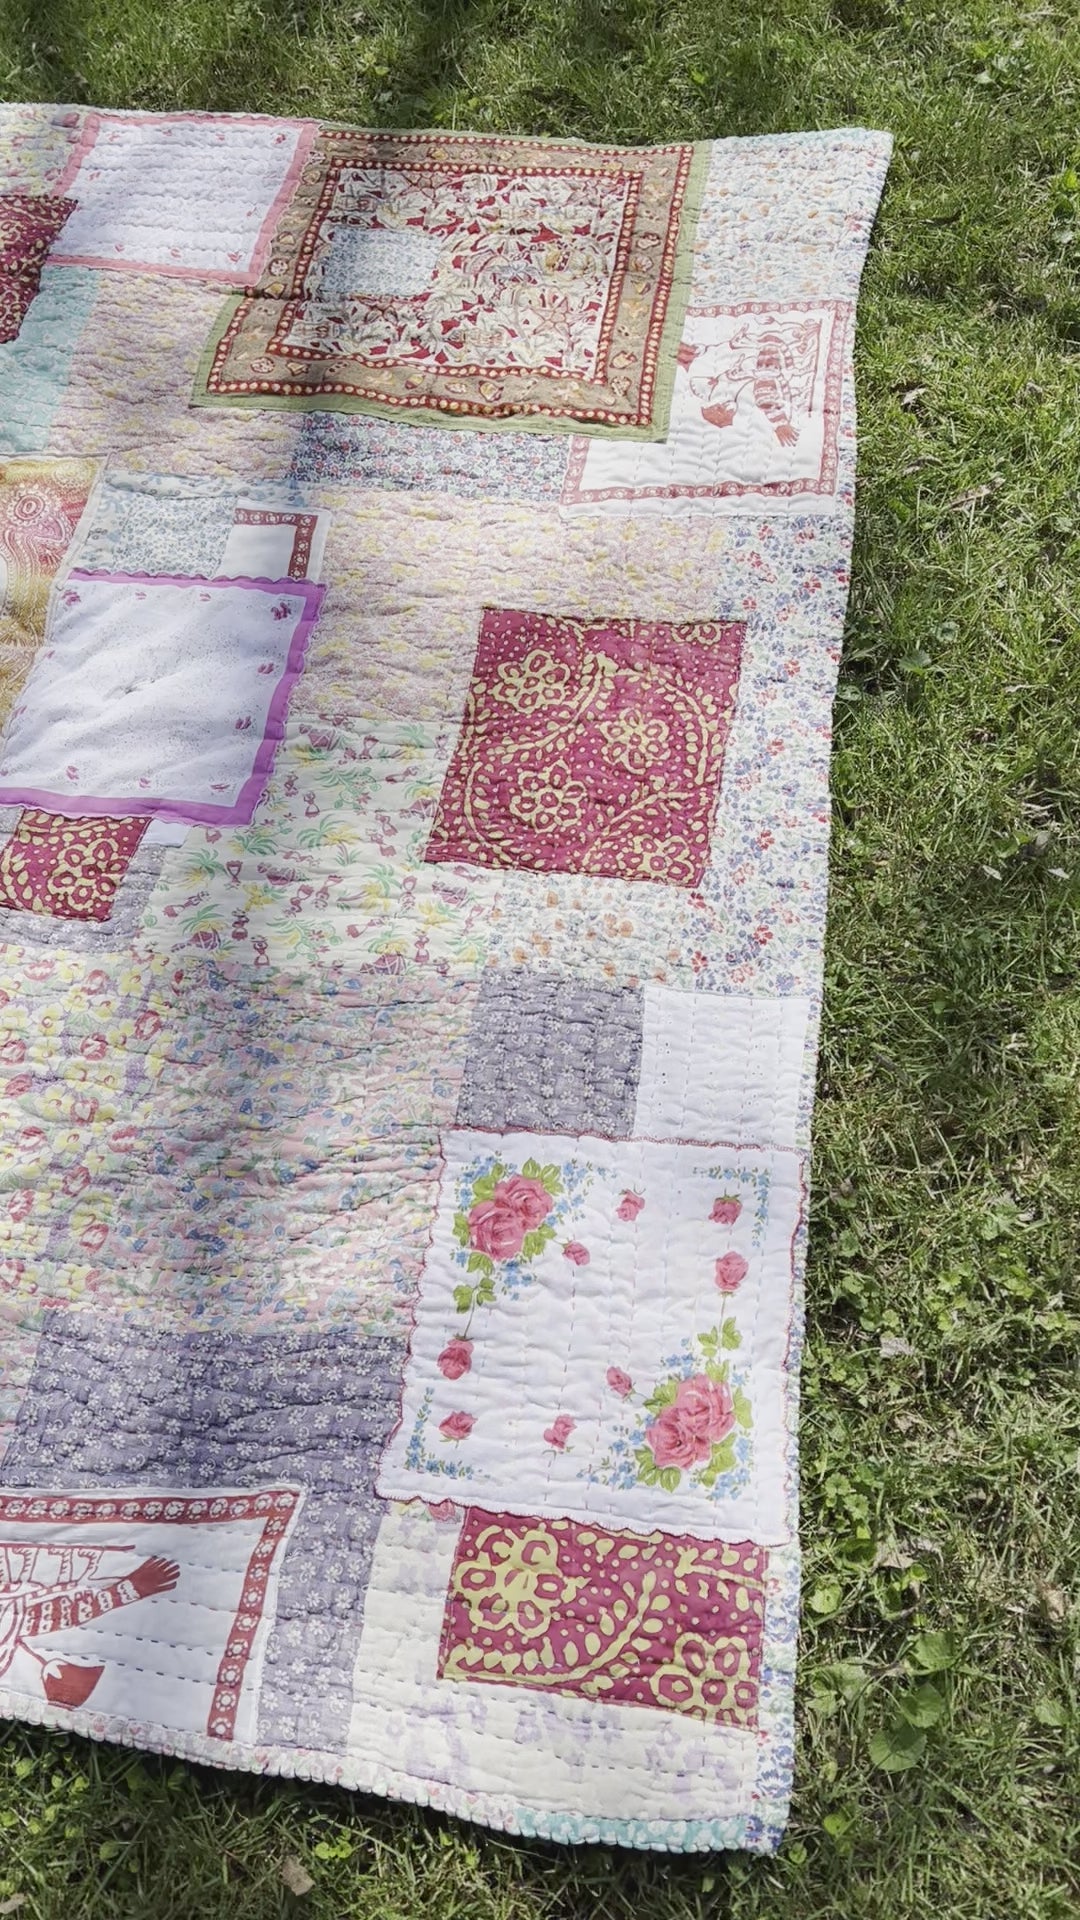 a video of the quilt, outside against a green lush background, birds chirping in distance